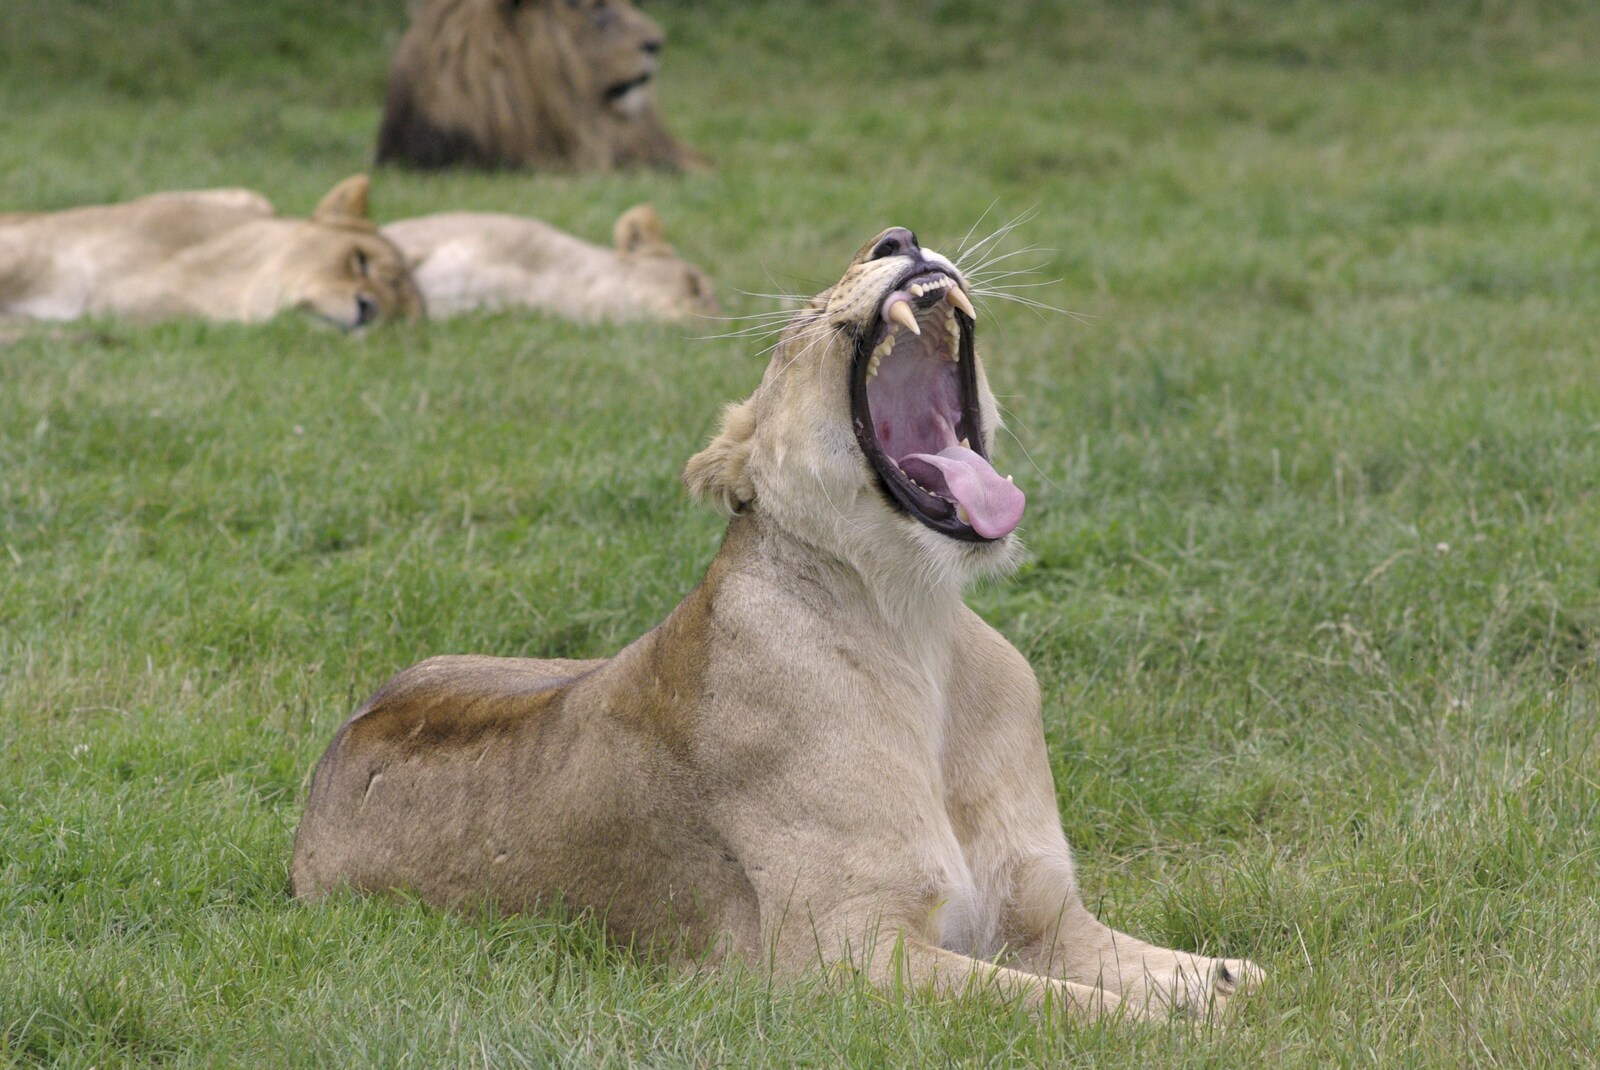 A lion has a toothy yawn from The BBs in a Garden, and a Qualcomm Safari, Woburn, Bedfordshire - 22nd July 2007